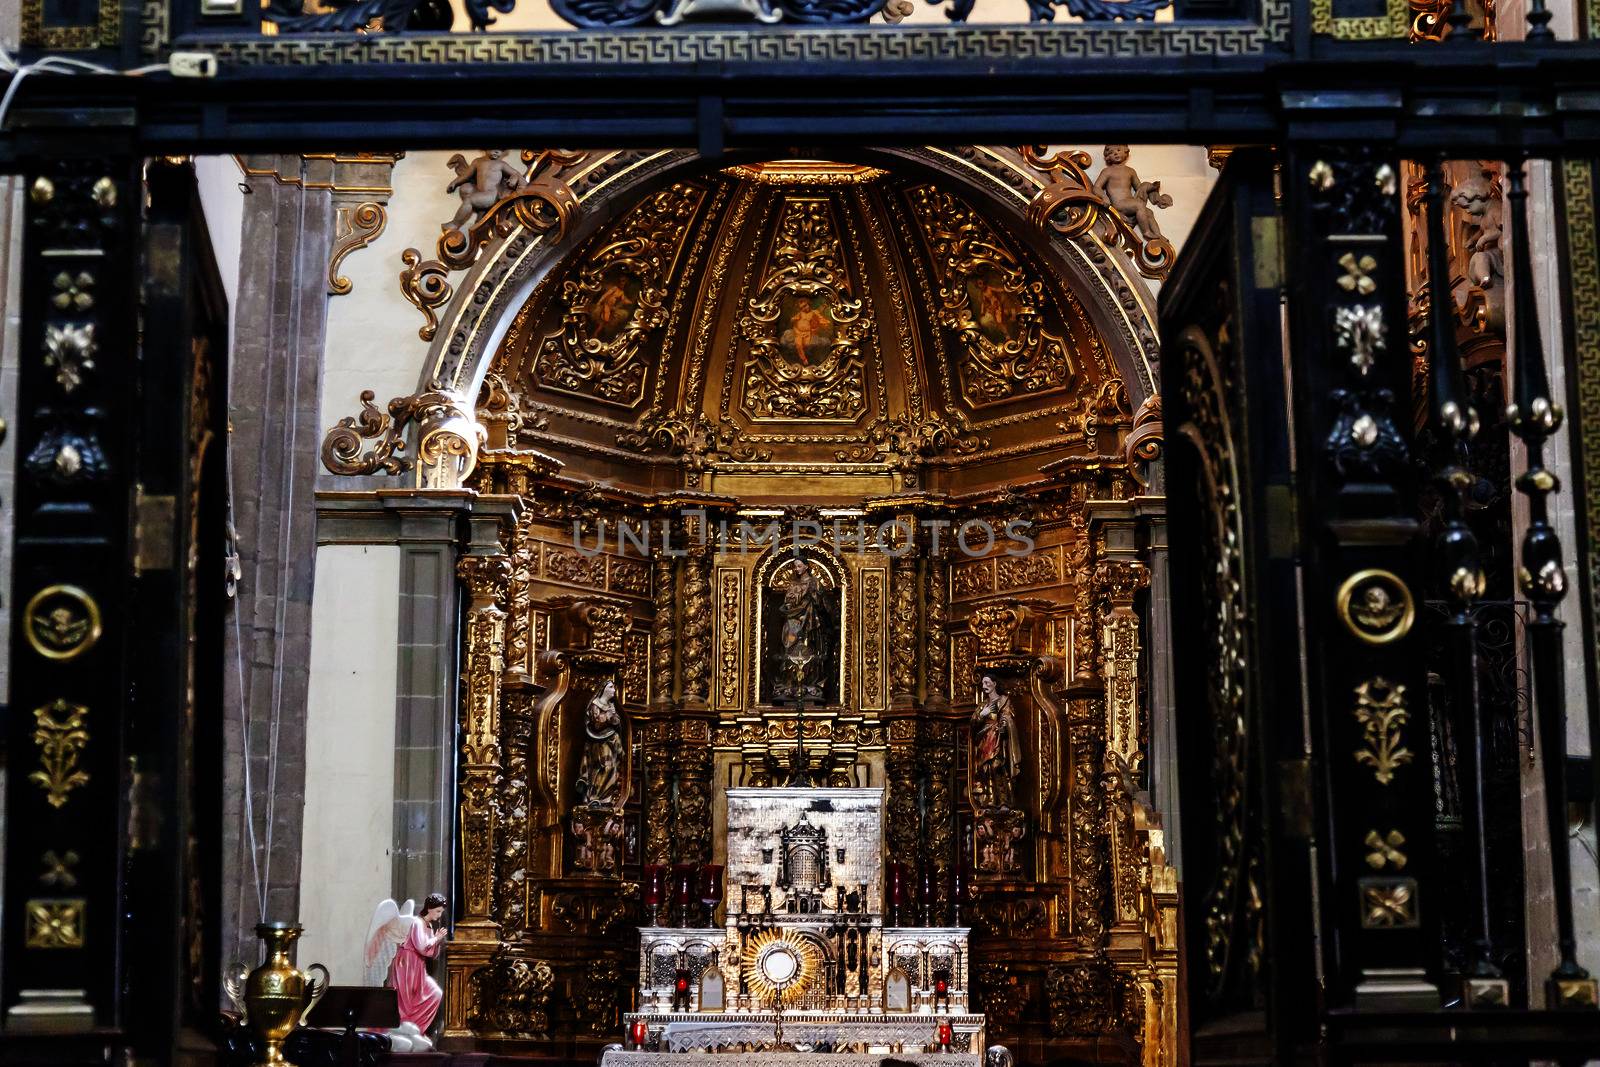  Small Chapel Altar Old Basilica Shrine of Guadalupe Mexico City by bill_perry